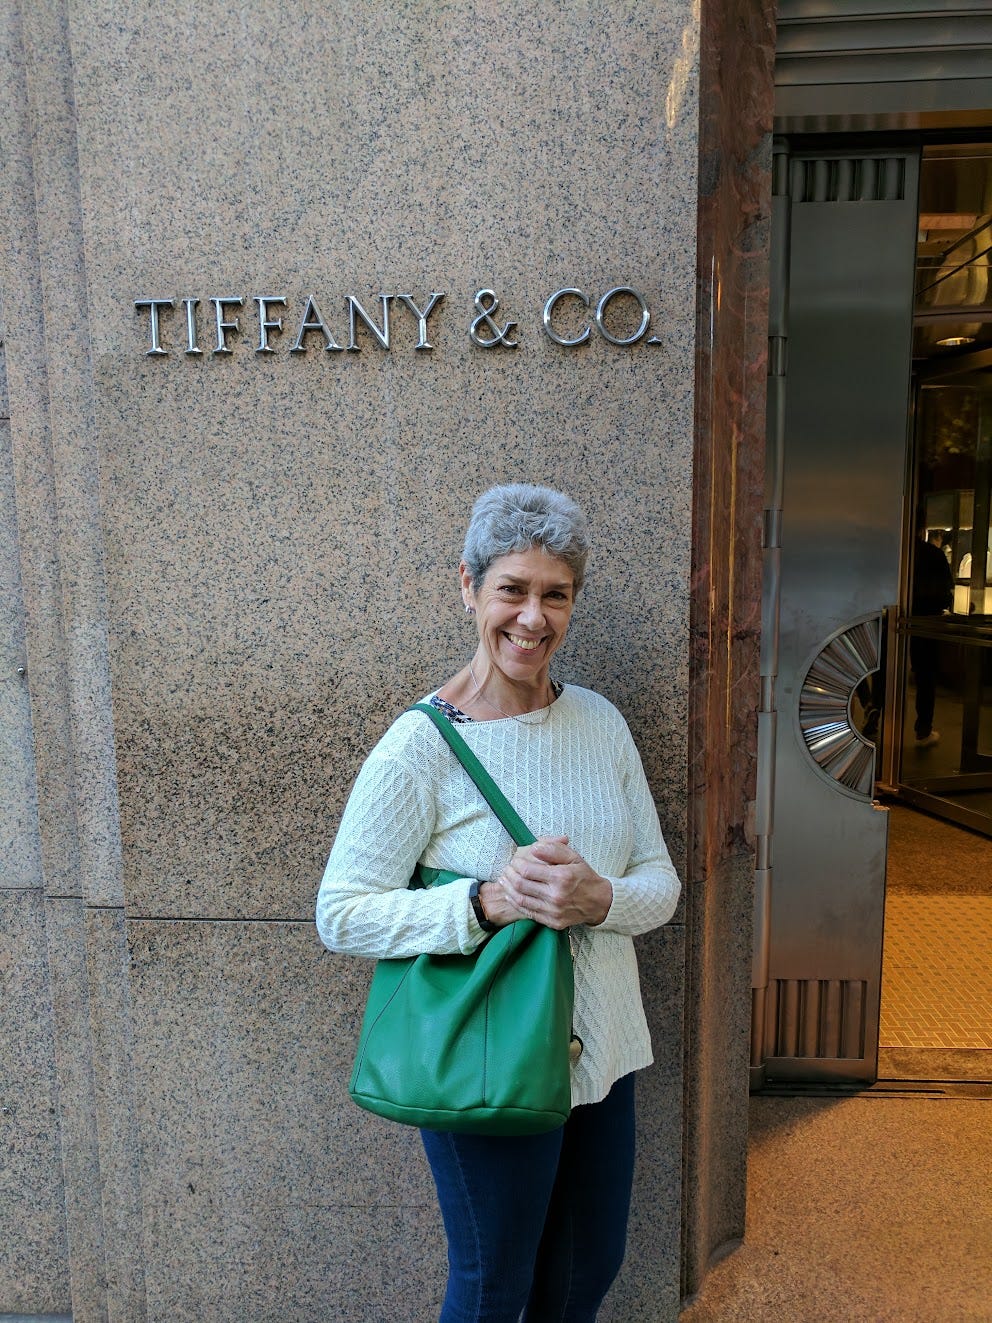 A white woman with white hair holds a green purse in front of a Tiffany sign